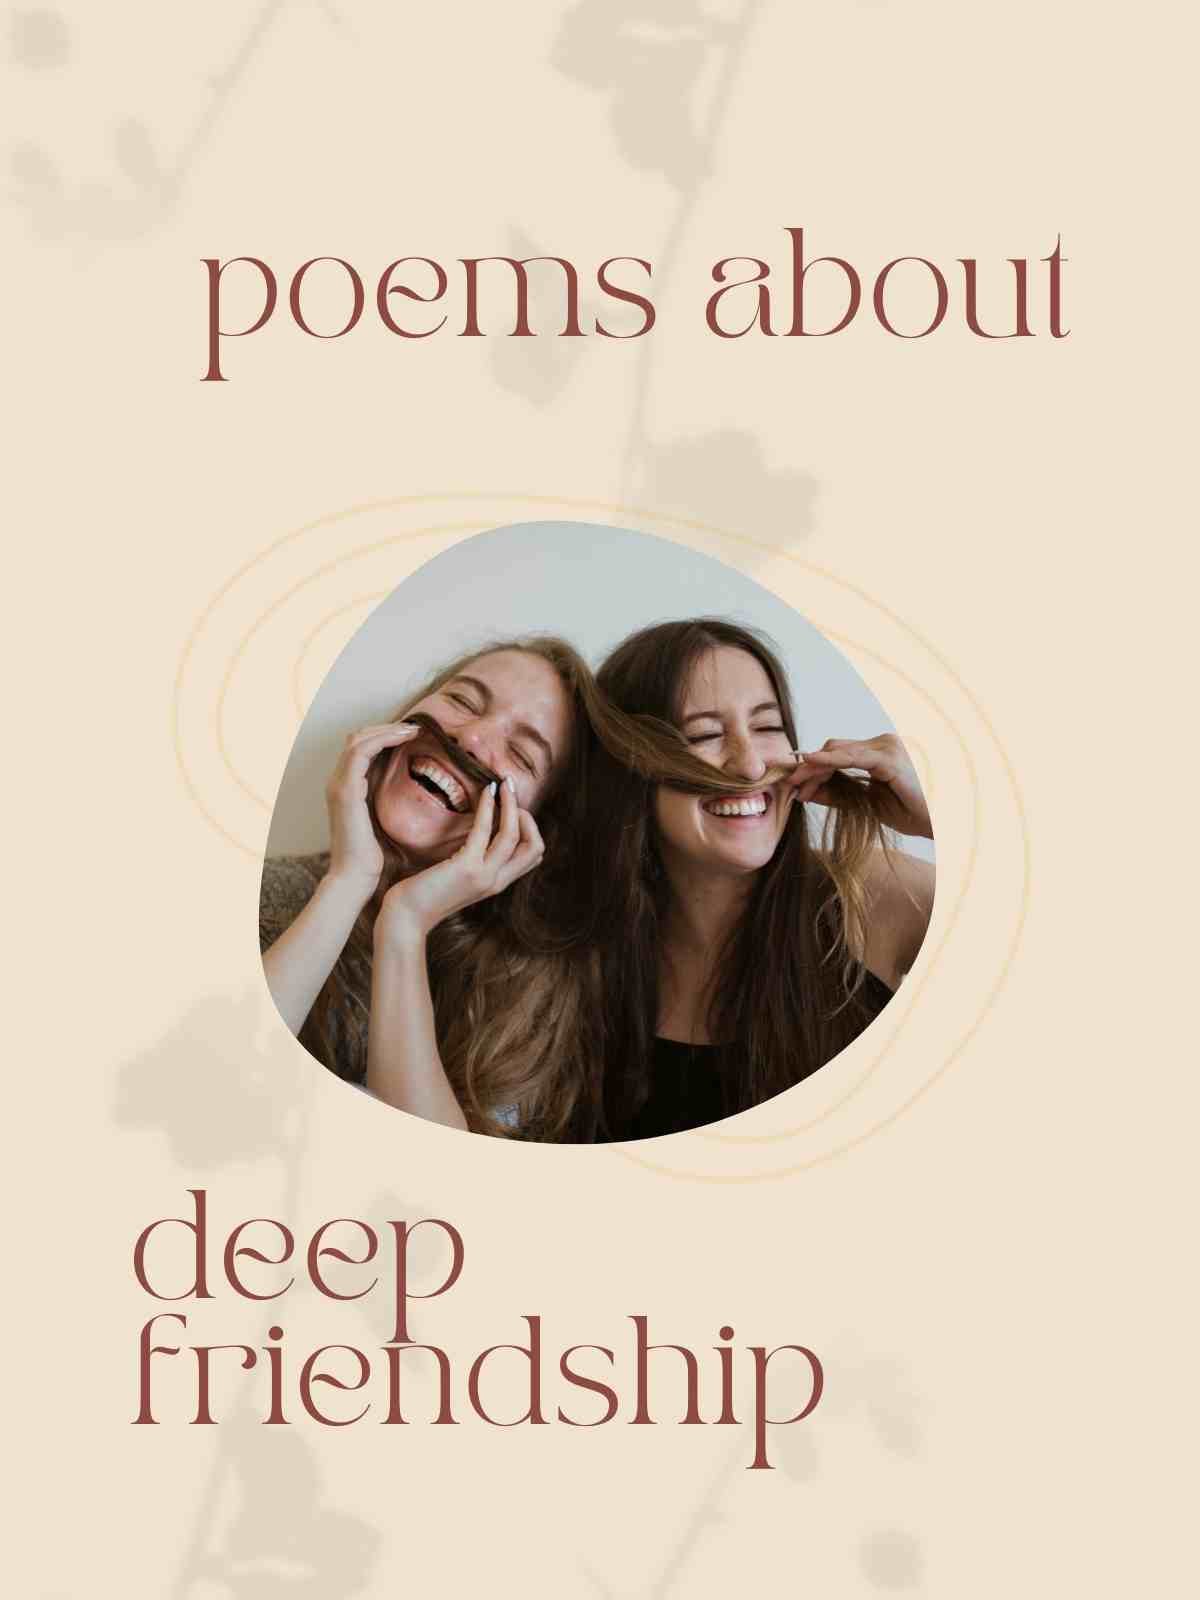 Poems about deep friendship